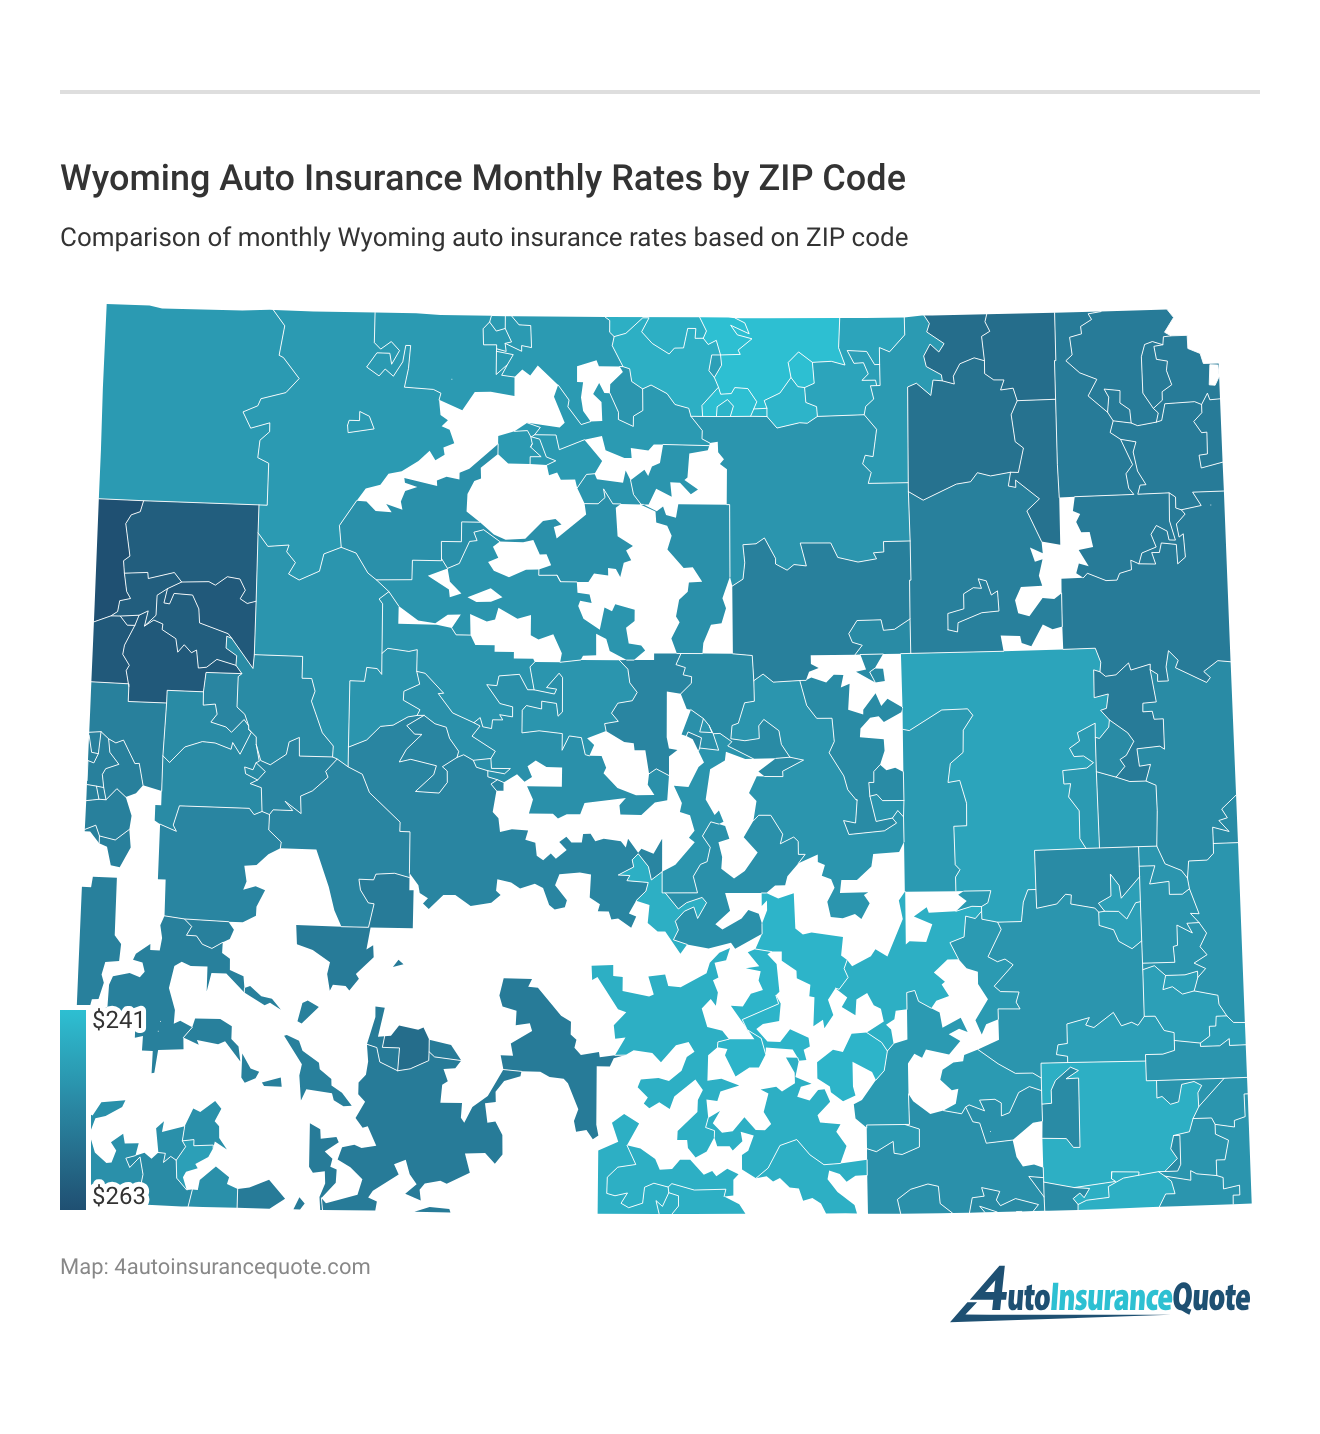 <h3>Wyoming Auto Insurance Monthly Rates by ZIP Code</h3>